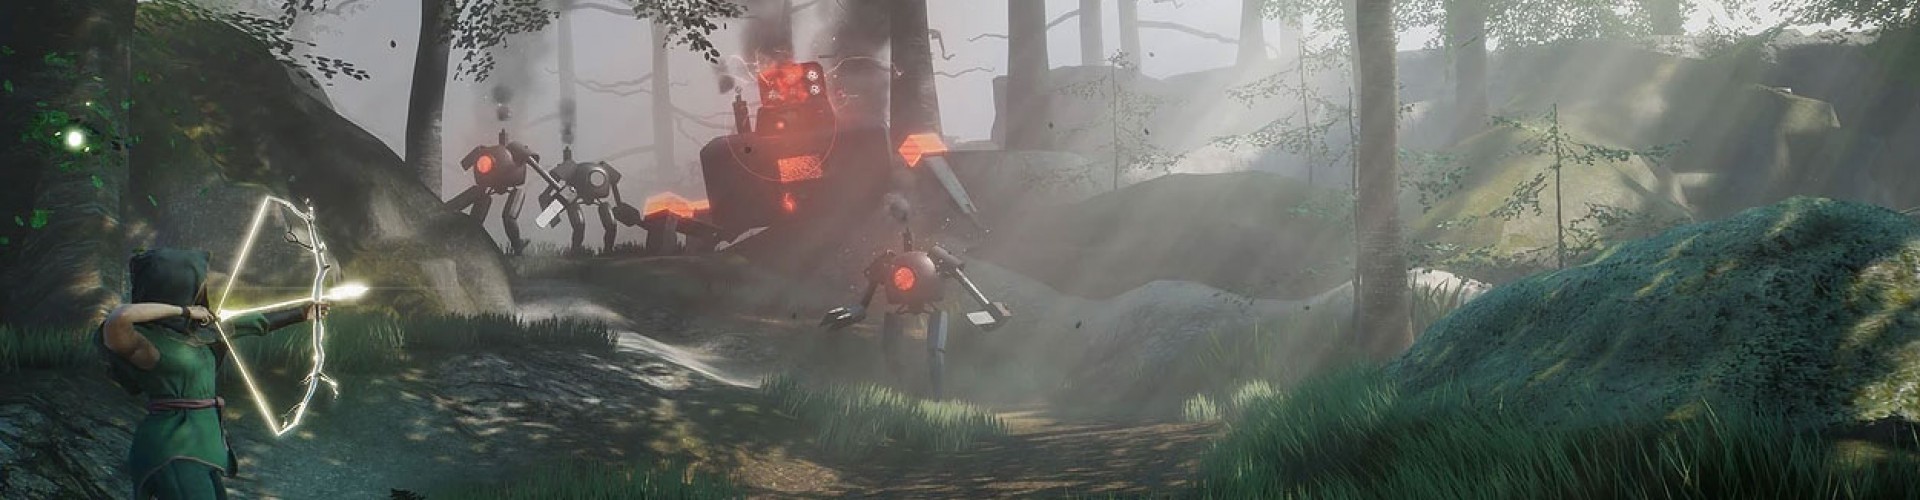 Screenshot from videogame Sai. Forest scene, with robots.